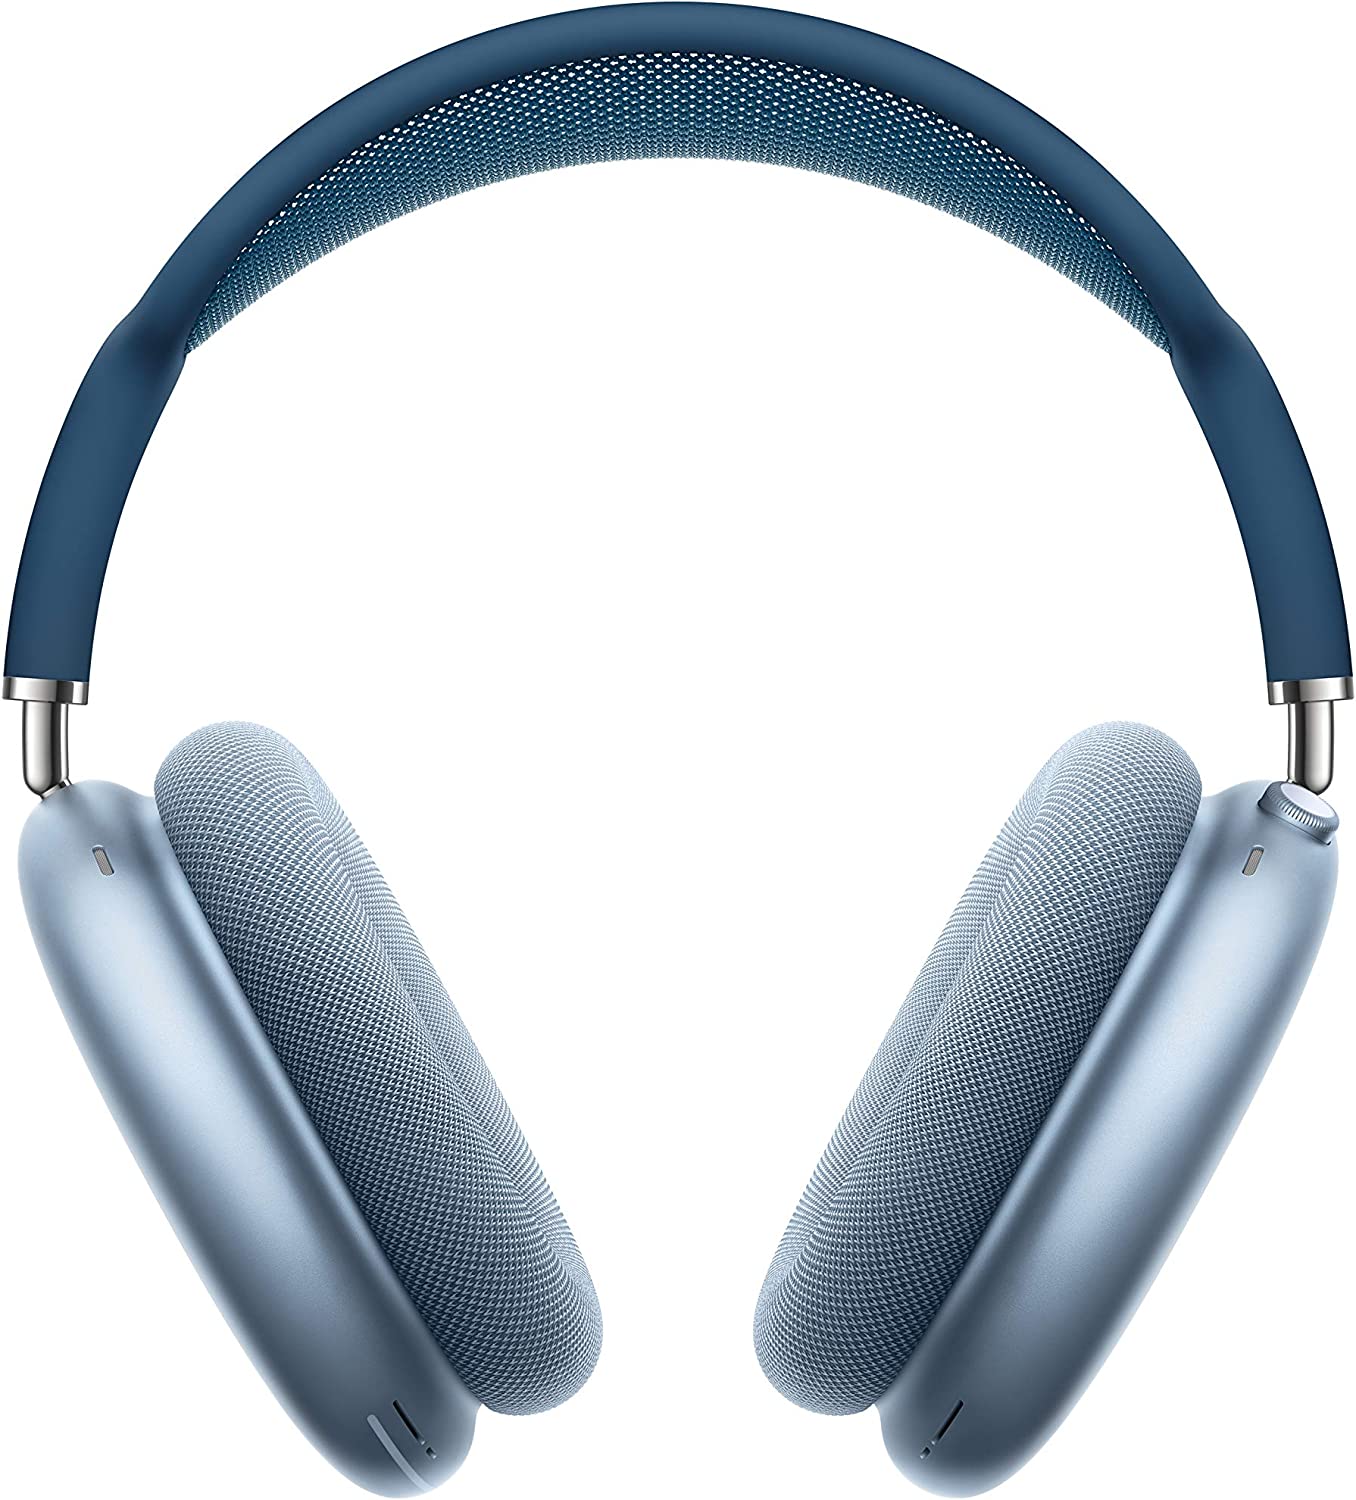 BUY THE BEST NOISE-CANCELING HEADPHONES RIGHT NOW